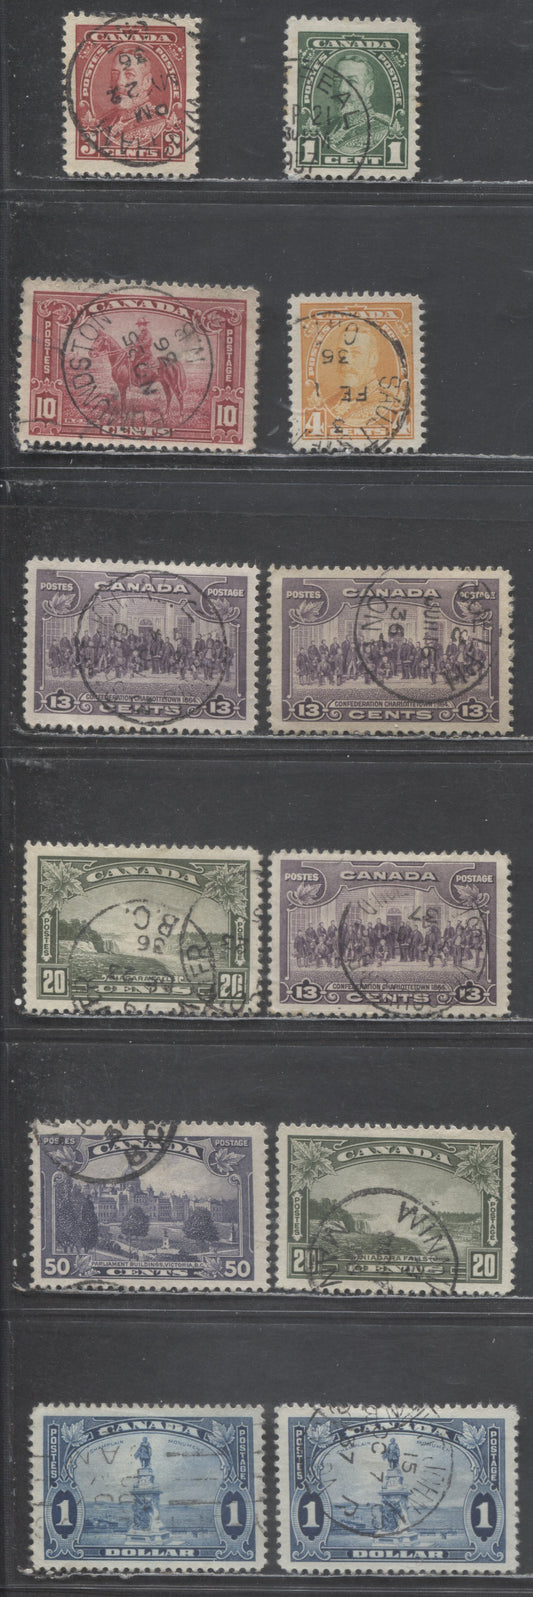 Lot 399 Canada #217/227i 1c, 3c, 4c, 10c-$1 Green - Pale Blue King George V & Various Scenes, 1935-1937 Dated Die Issue, 12 VF Used Singles & 1 Coil Pair, With Full & Partial, In-Period Dated CDS Town Cancellation, Including Both Shades of the $1